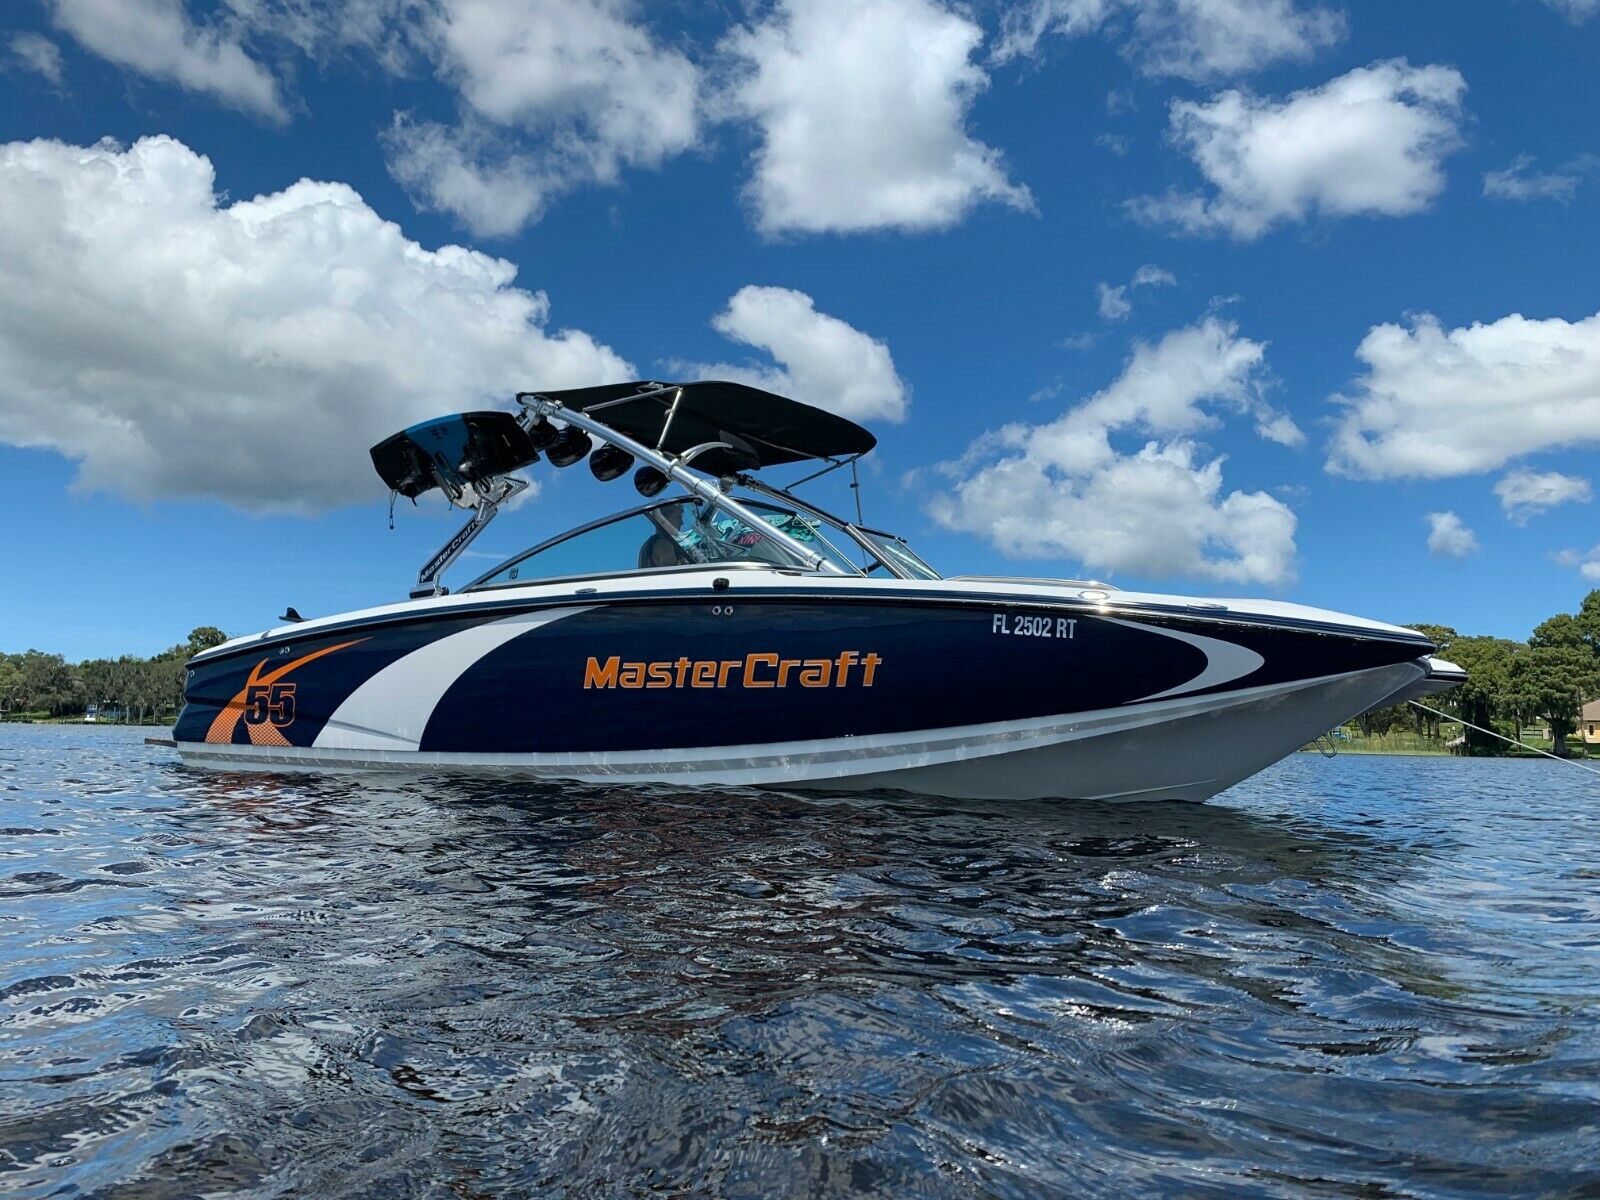 Mastercraft X55 2011 for sale for $67,900 - Boats-from-USA.com